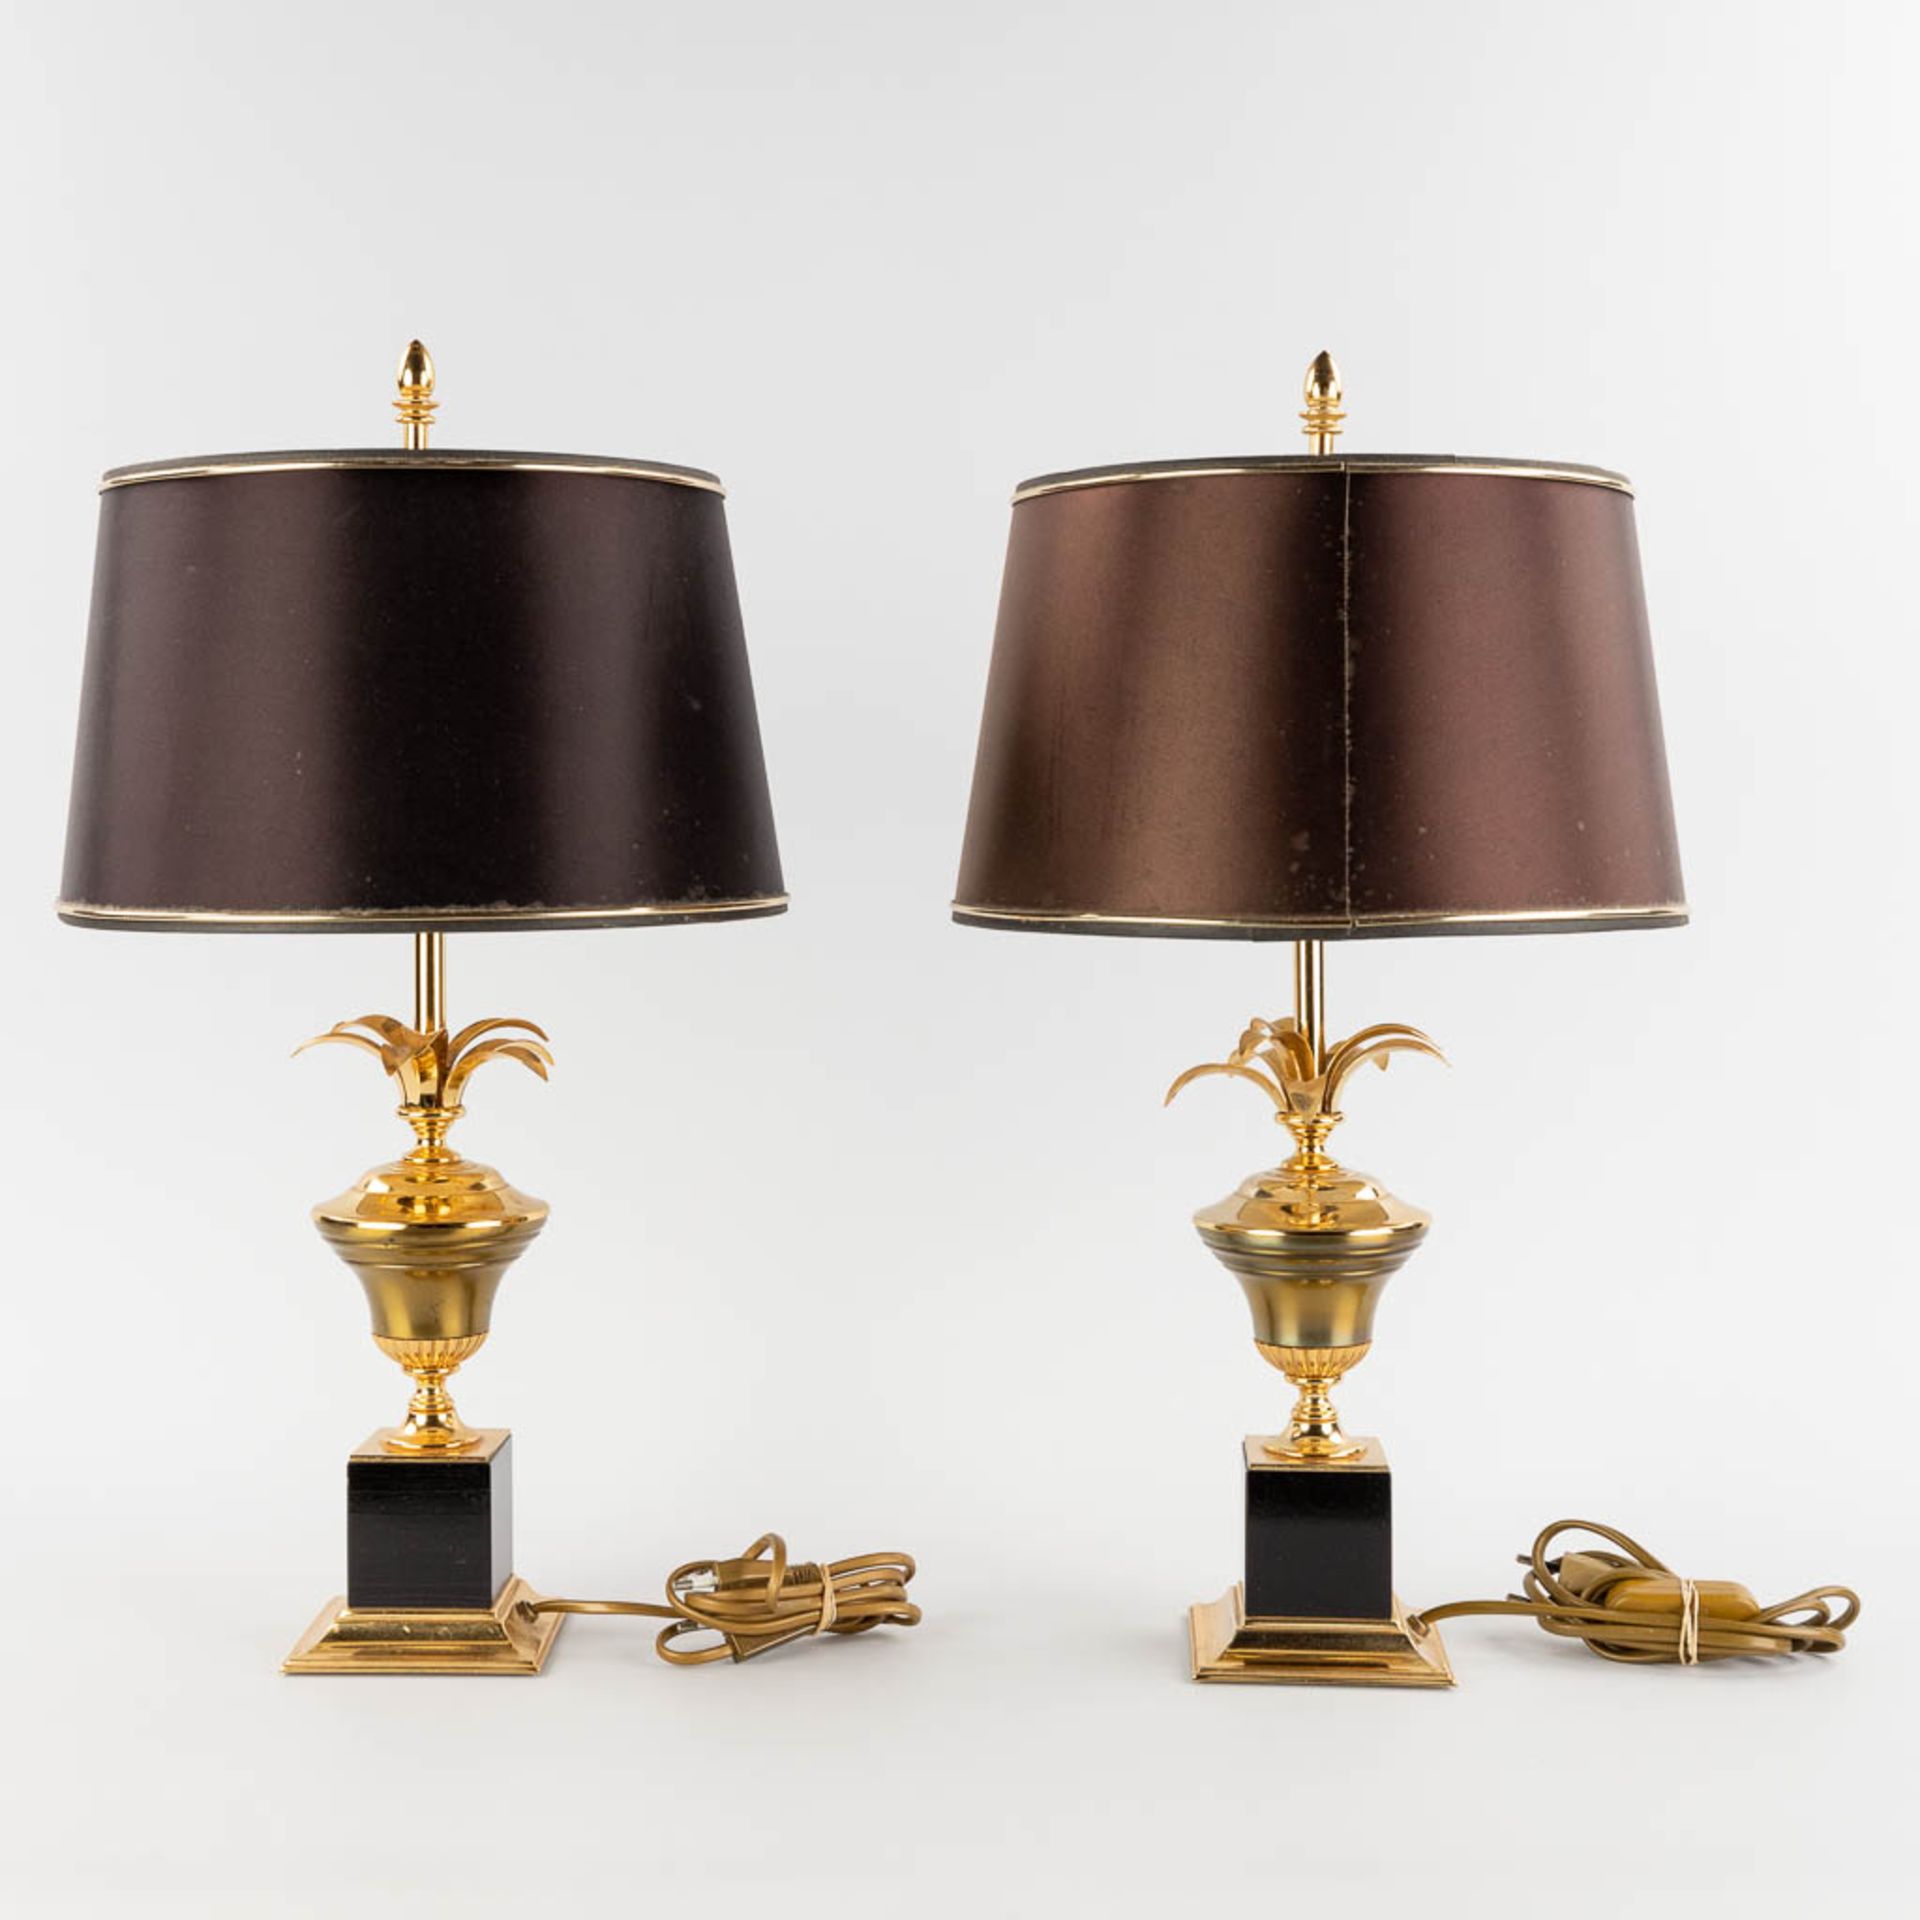 A pair of table lamps, Hollywood Regency style. 20th C. (H:54 x D:30 cm) - Image 5 of 10